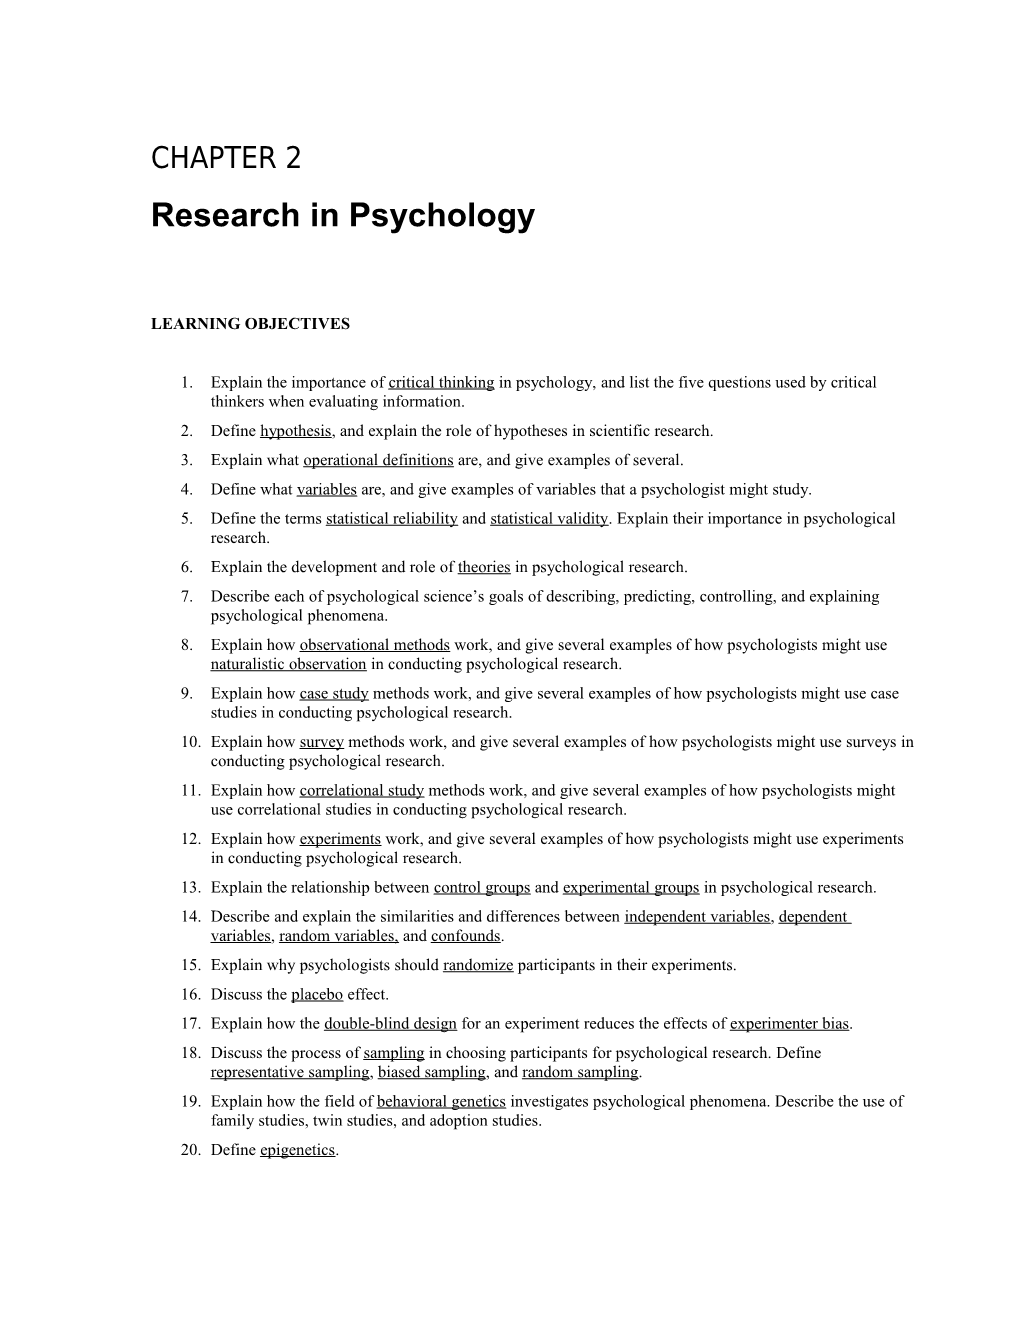 Chapter 2: Research in Psychology 1